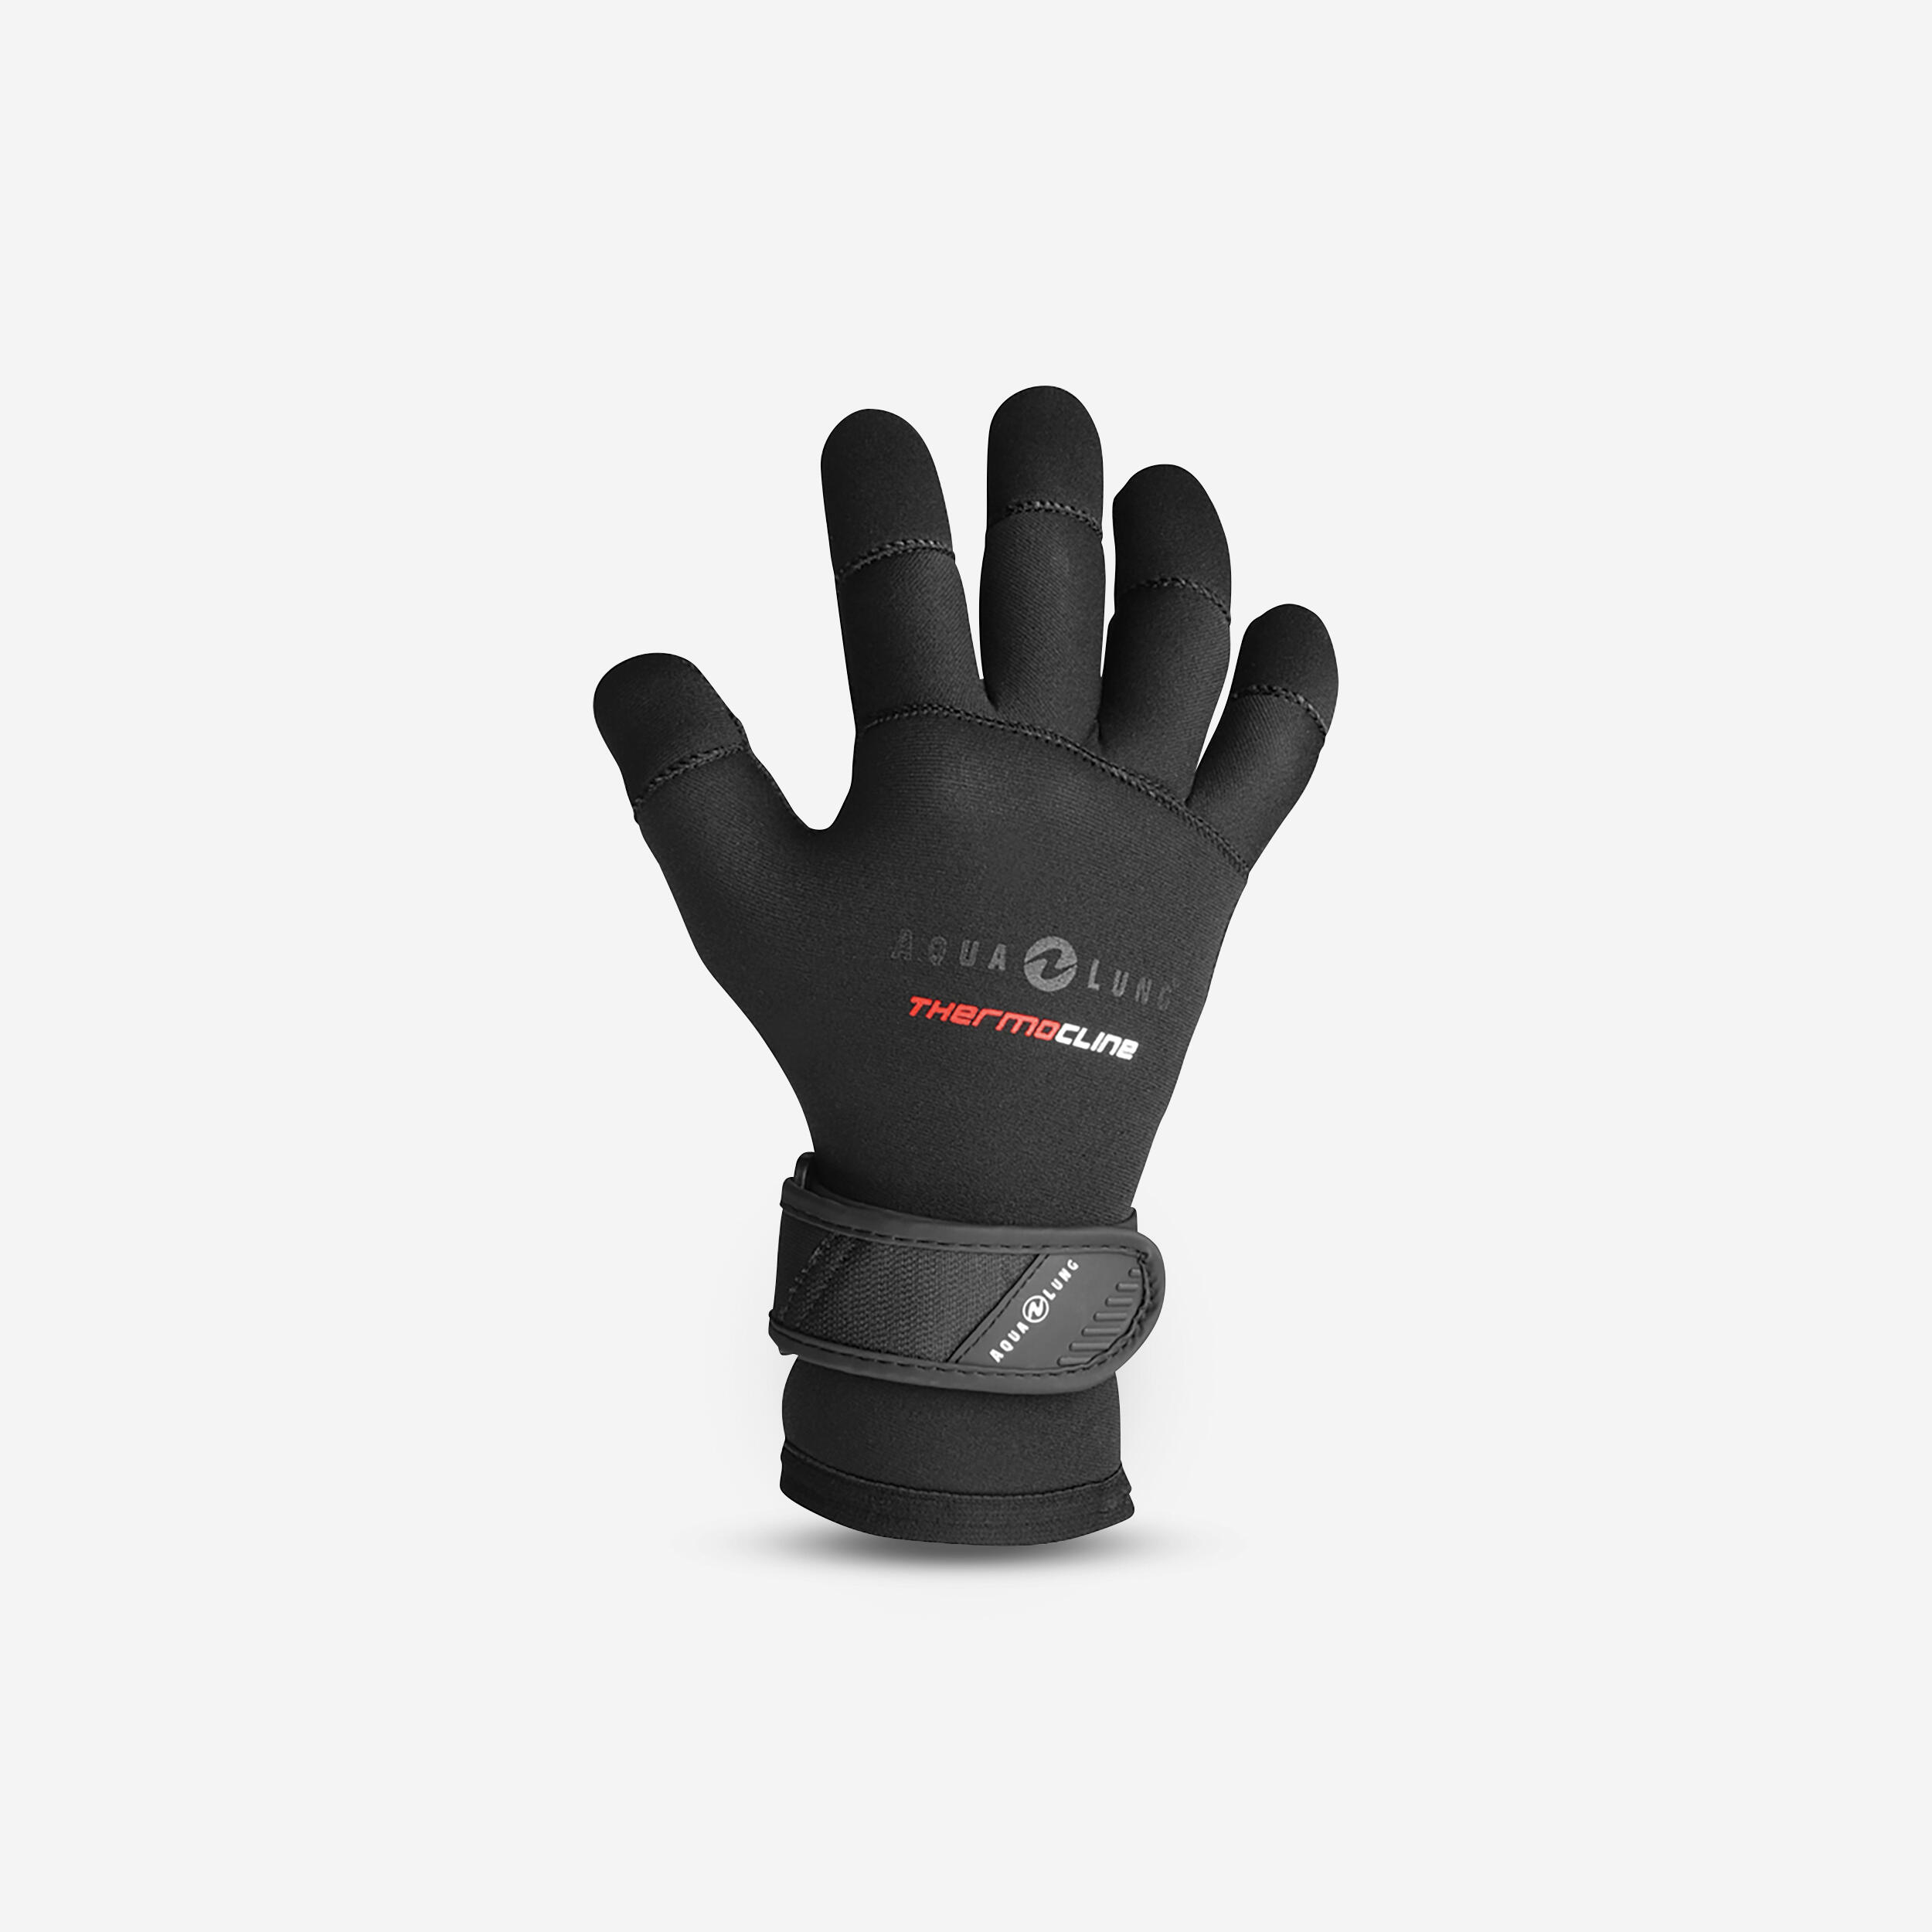 Gloves THERMOCLINE 3mm black 1/6